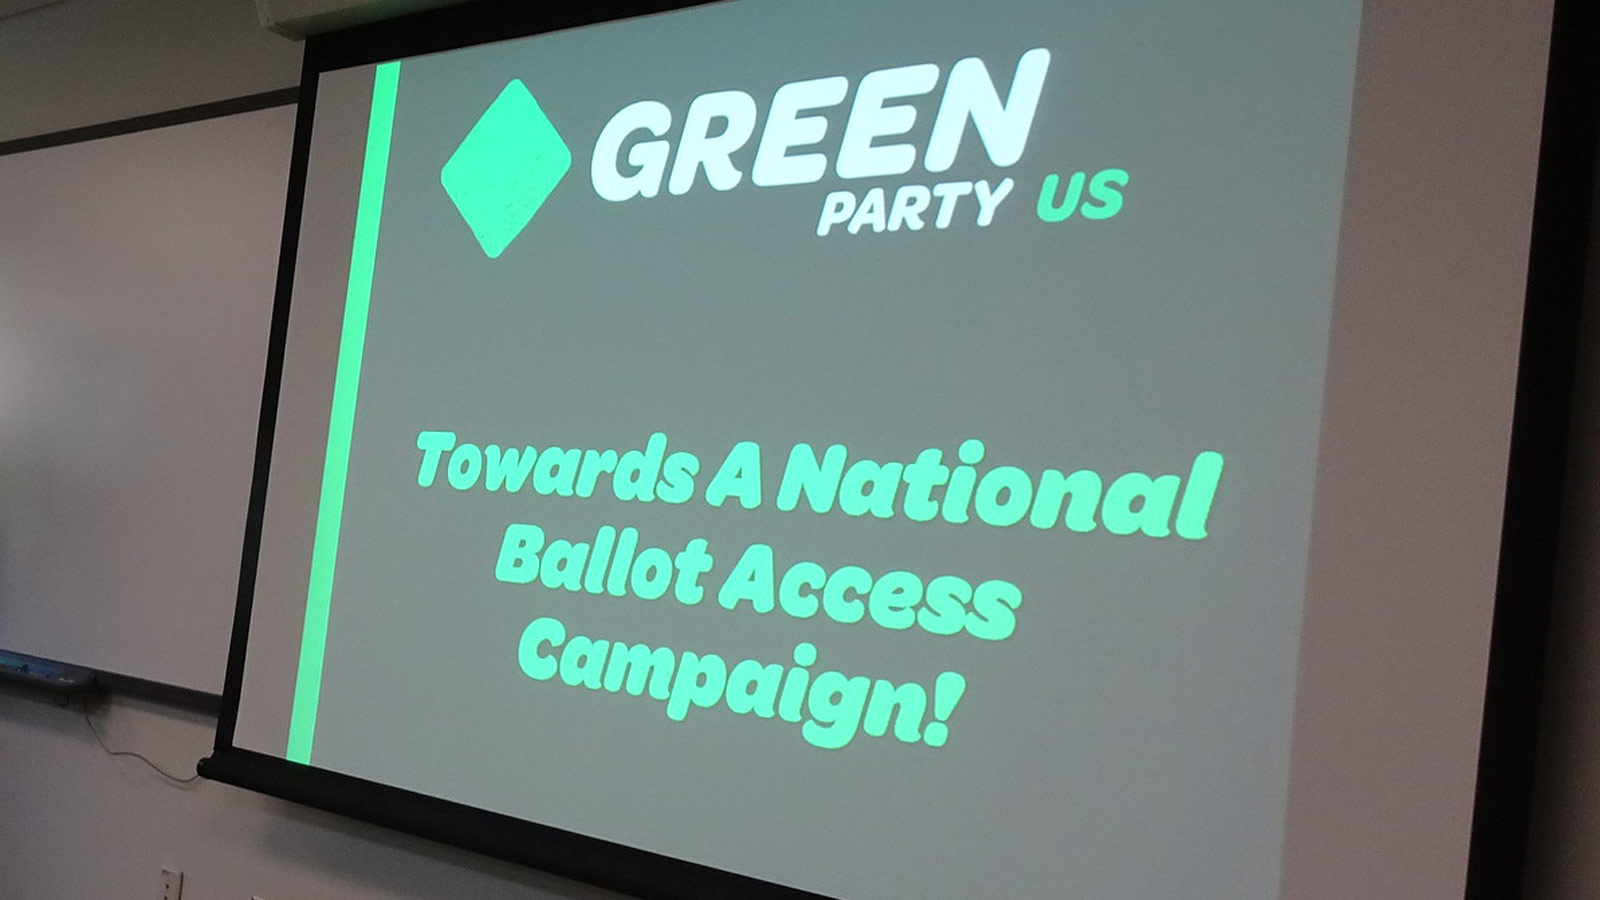 Projection on a video screen that says Green Party US Towards A National Ballot Access Campaign...